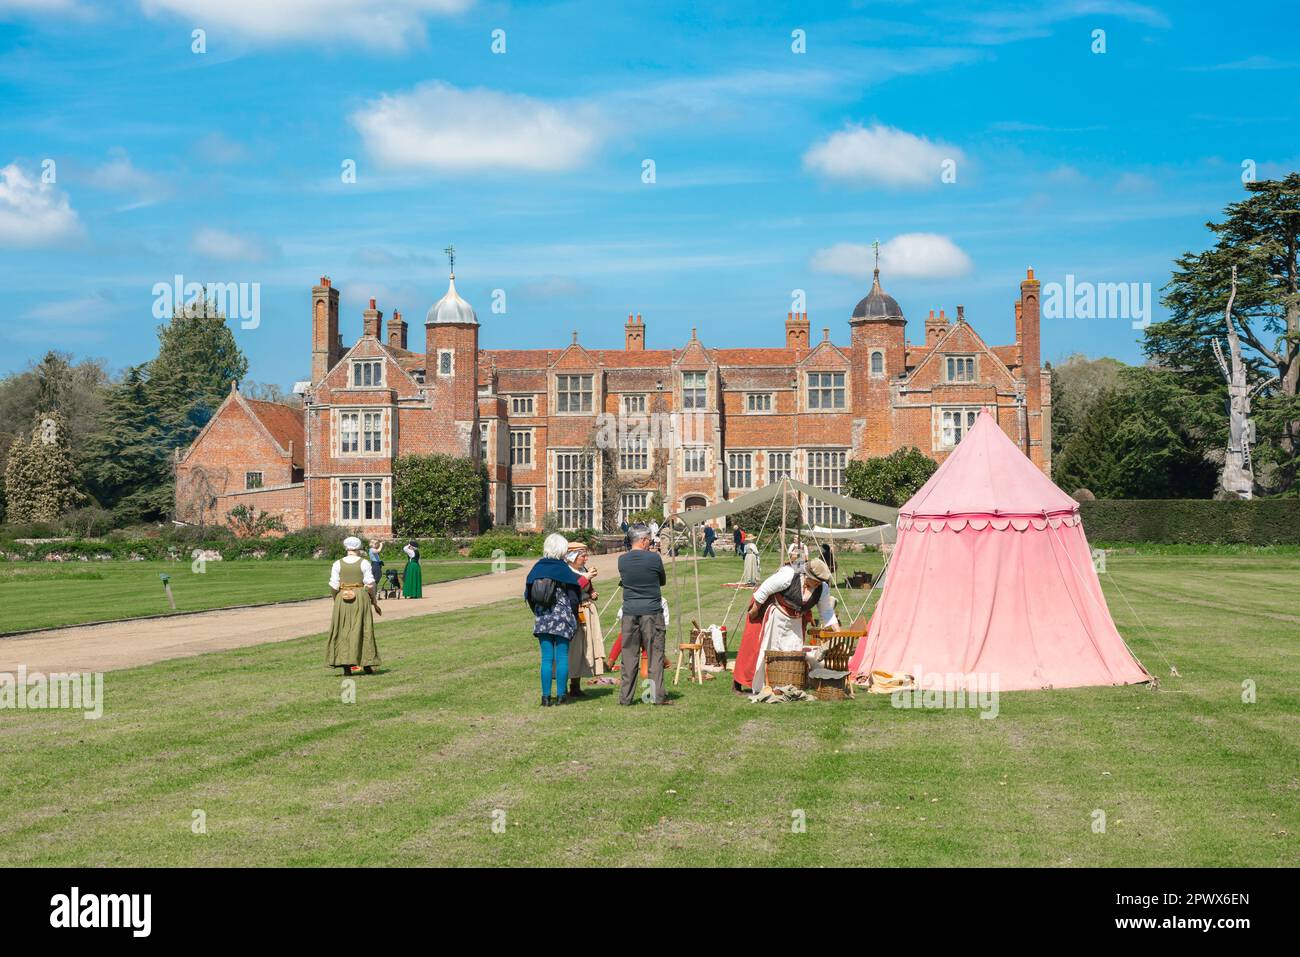 Historic England, view of 16th century Kentwell Hall in Suffolk during a popular Tudor reenactment weekend, Long Melford, Suffolk, England, UK Stock Photo